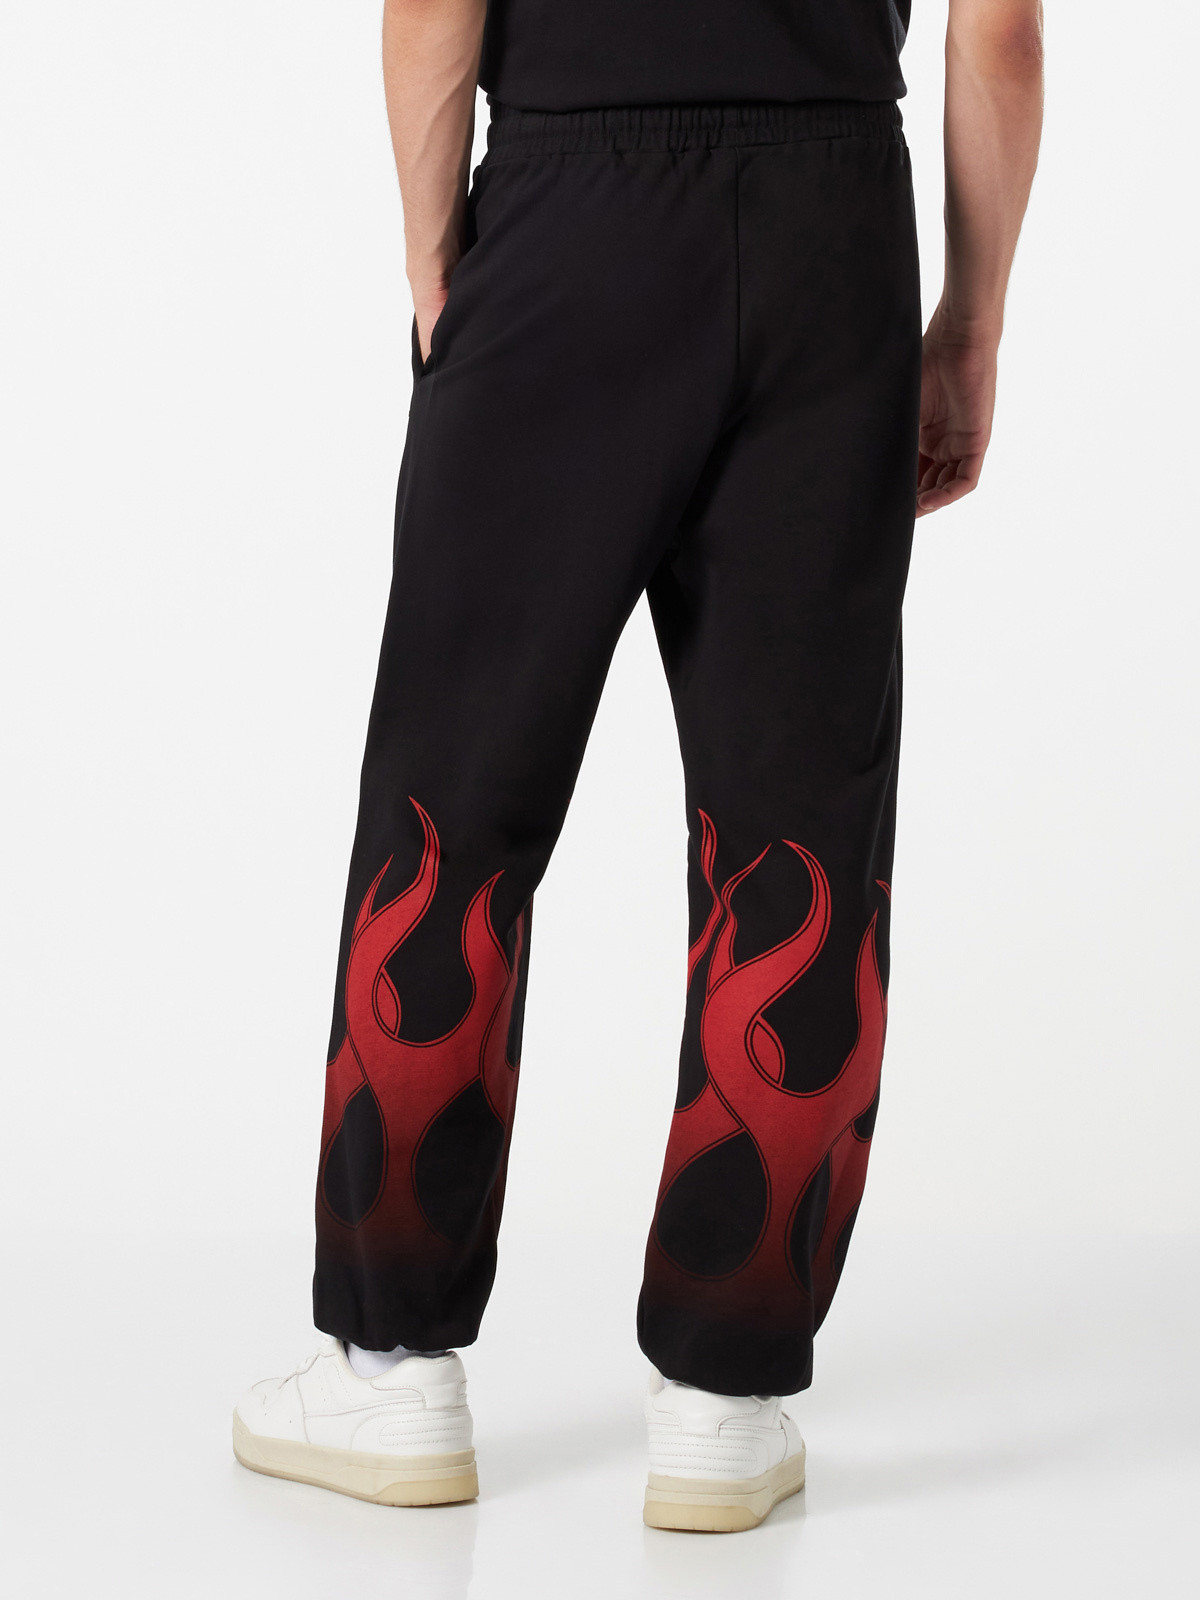 Vision of Super - Pantaloni con fiamme racing, Nero, large image number 4